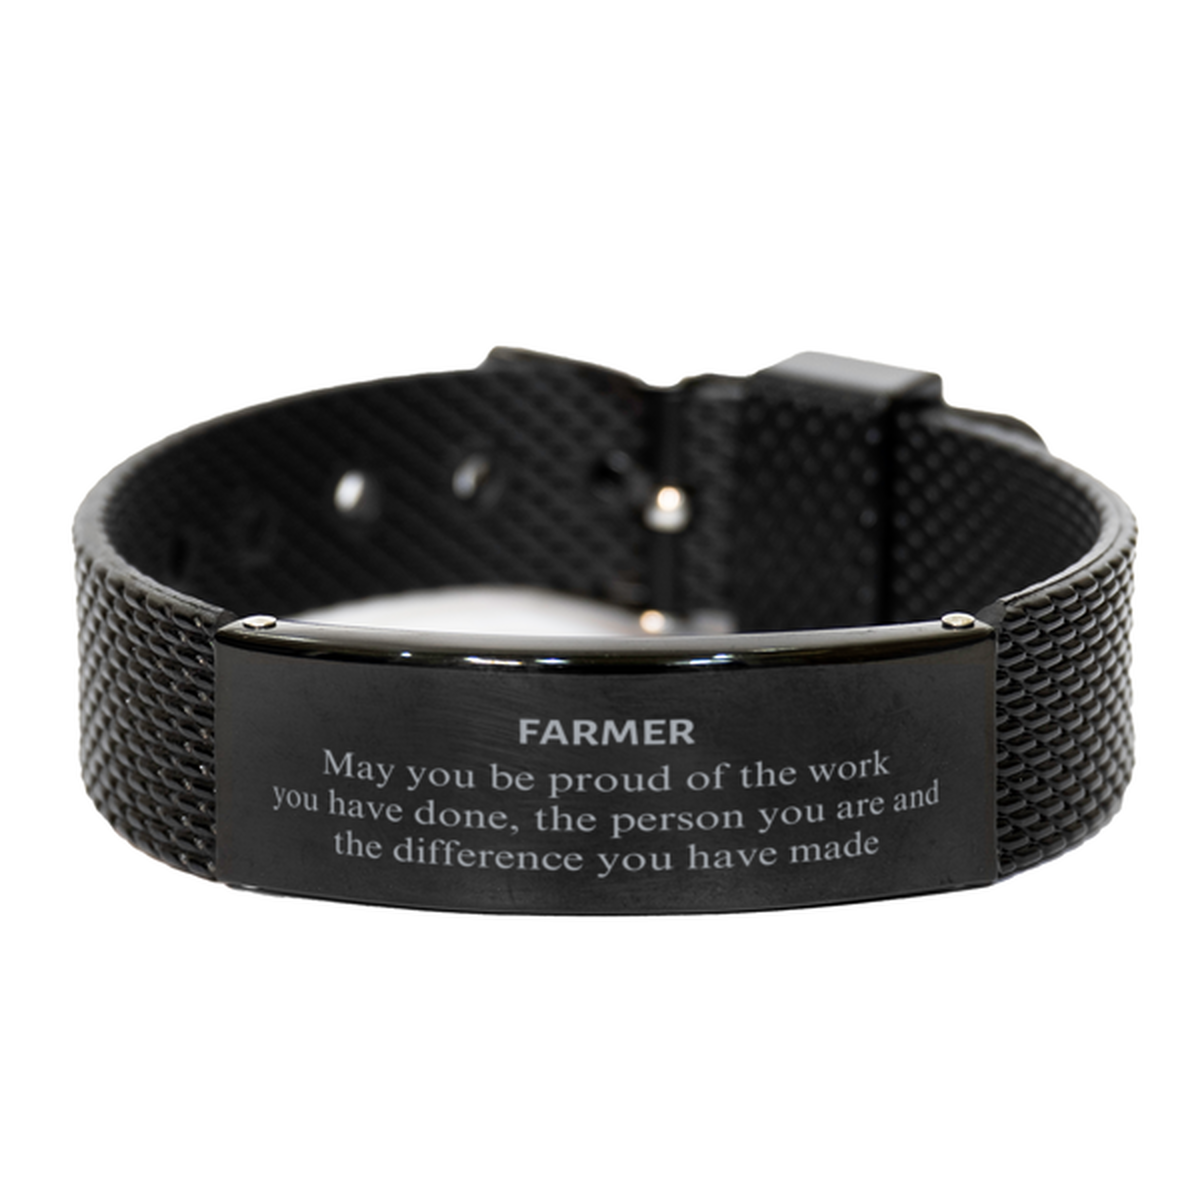 Farmer May you be proud of the work you have done, Retirement Farmer Black Shark Mesh Bracelet for Colleague Appreciation Gifts Amazing for Farmer